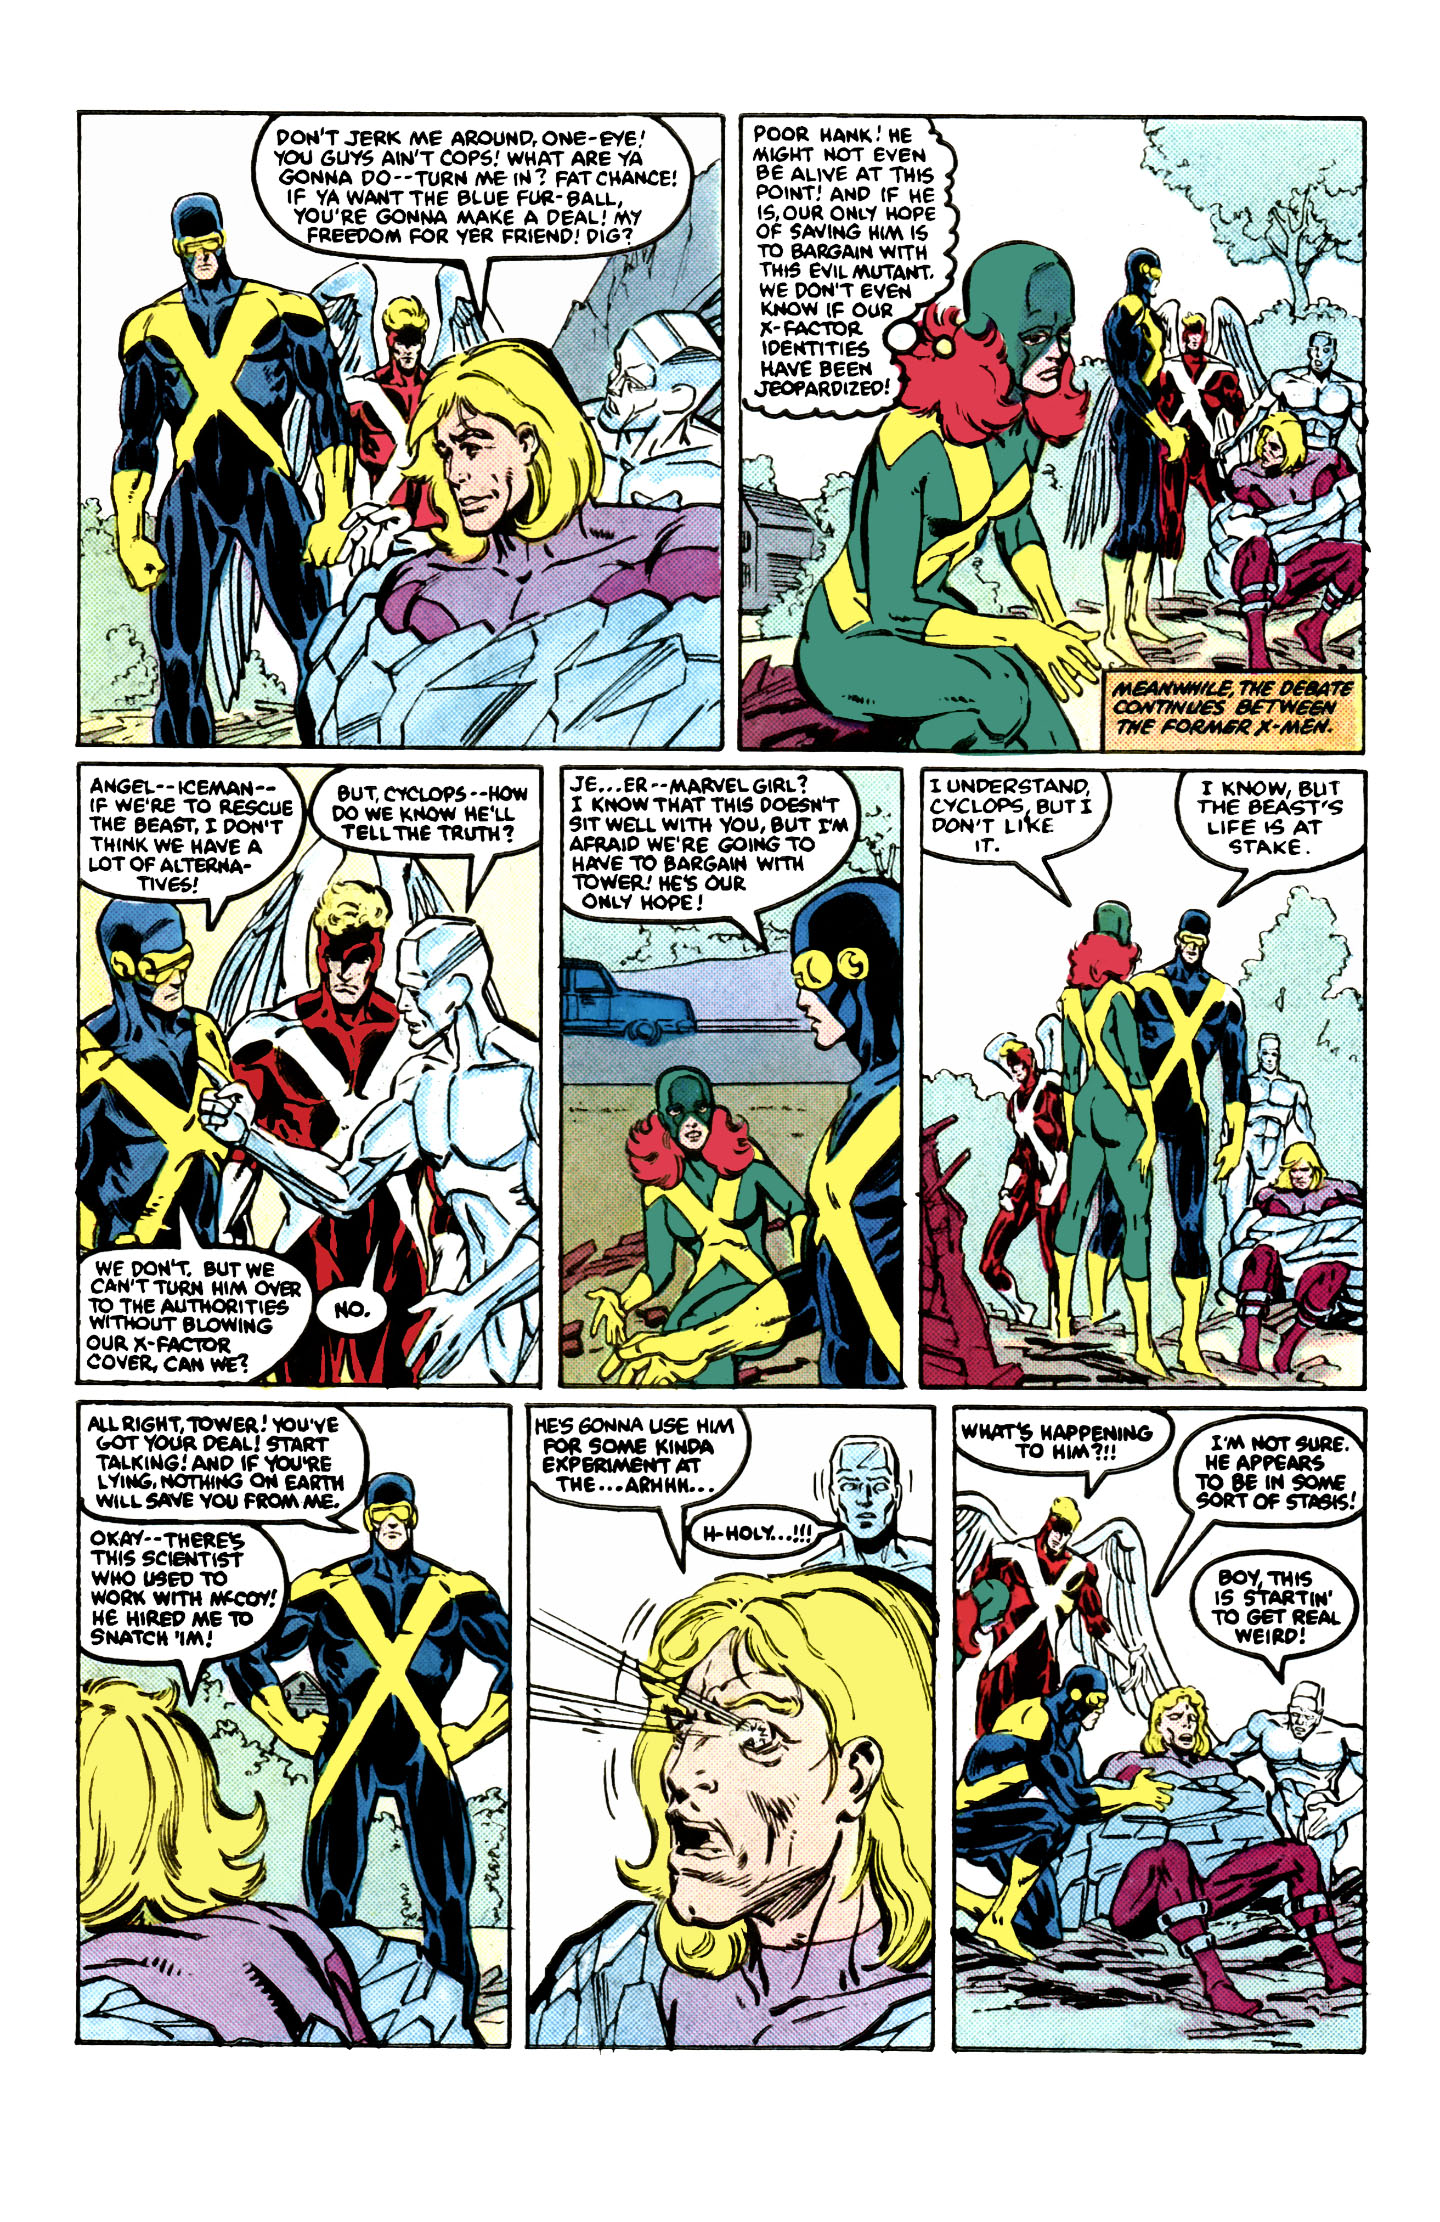 X-Factor (1986) 3 Page 4